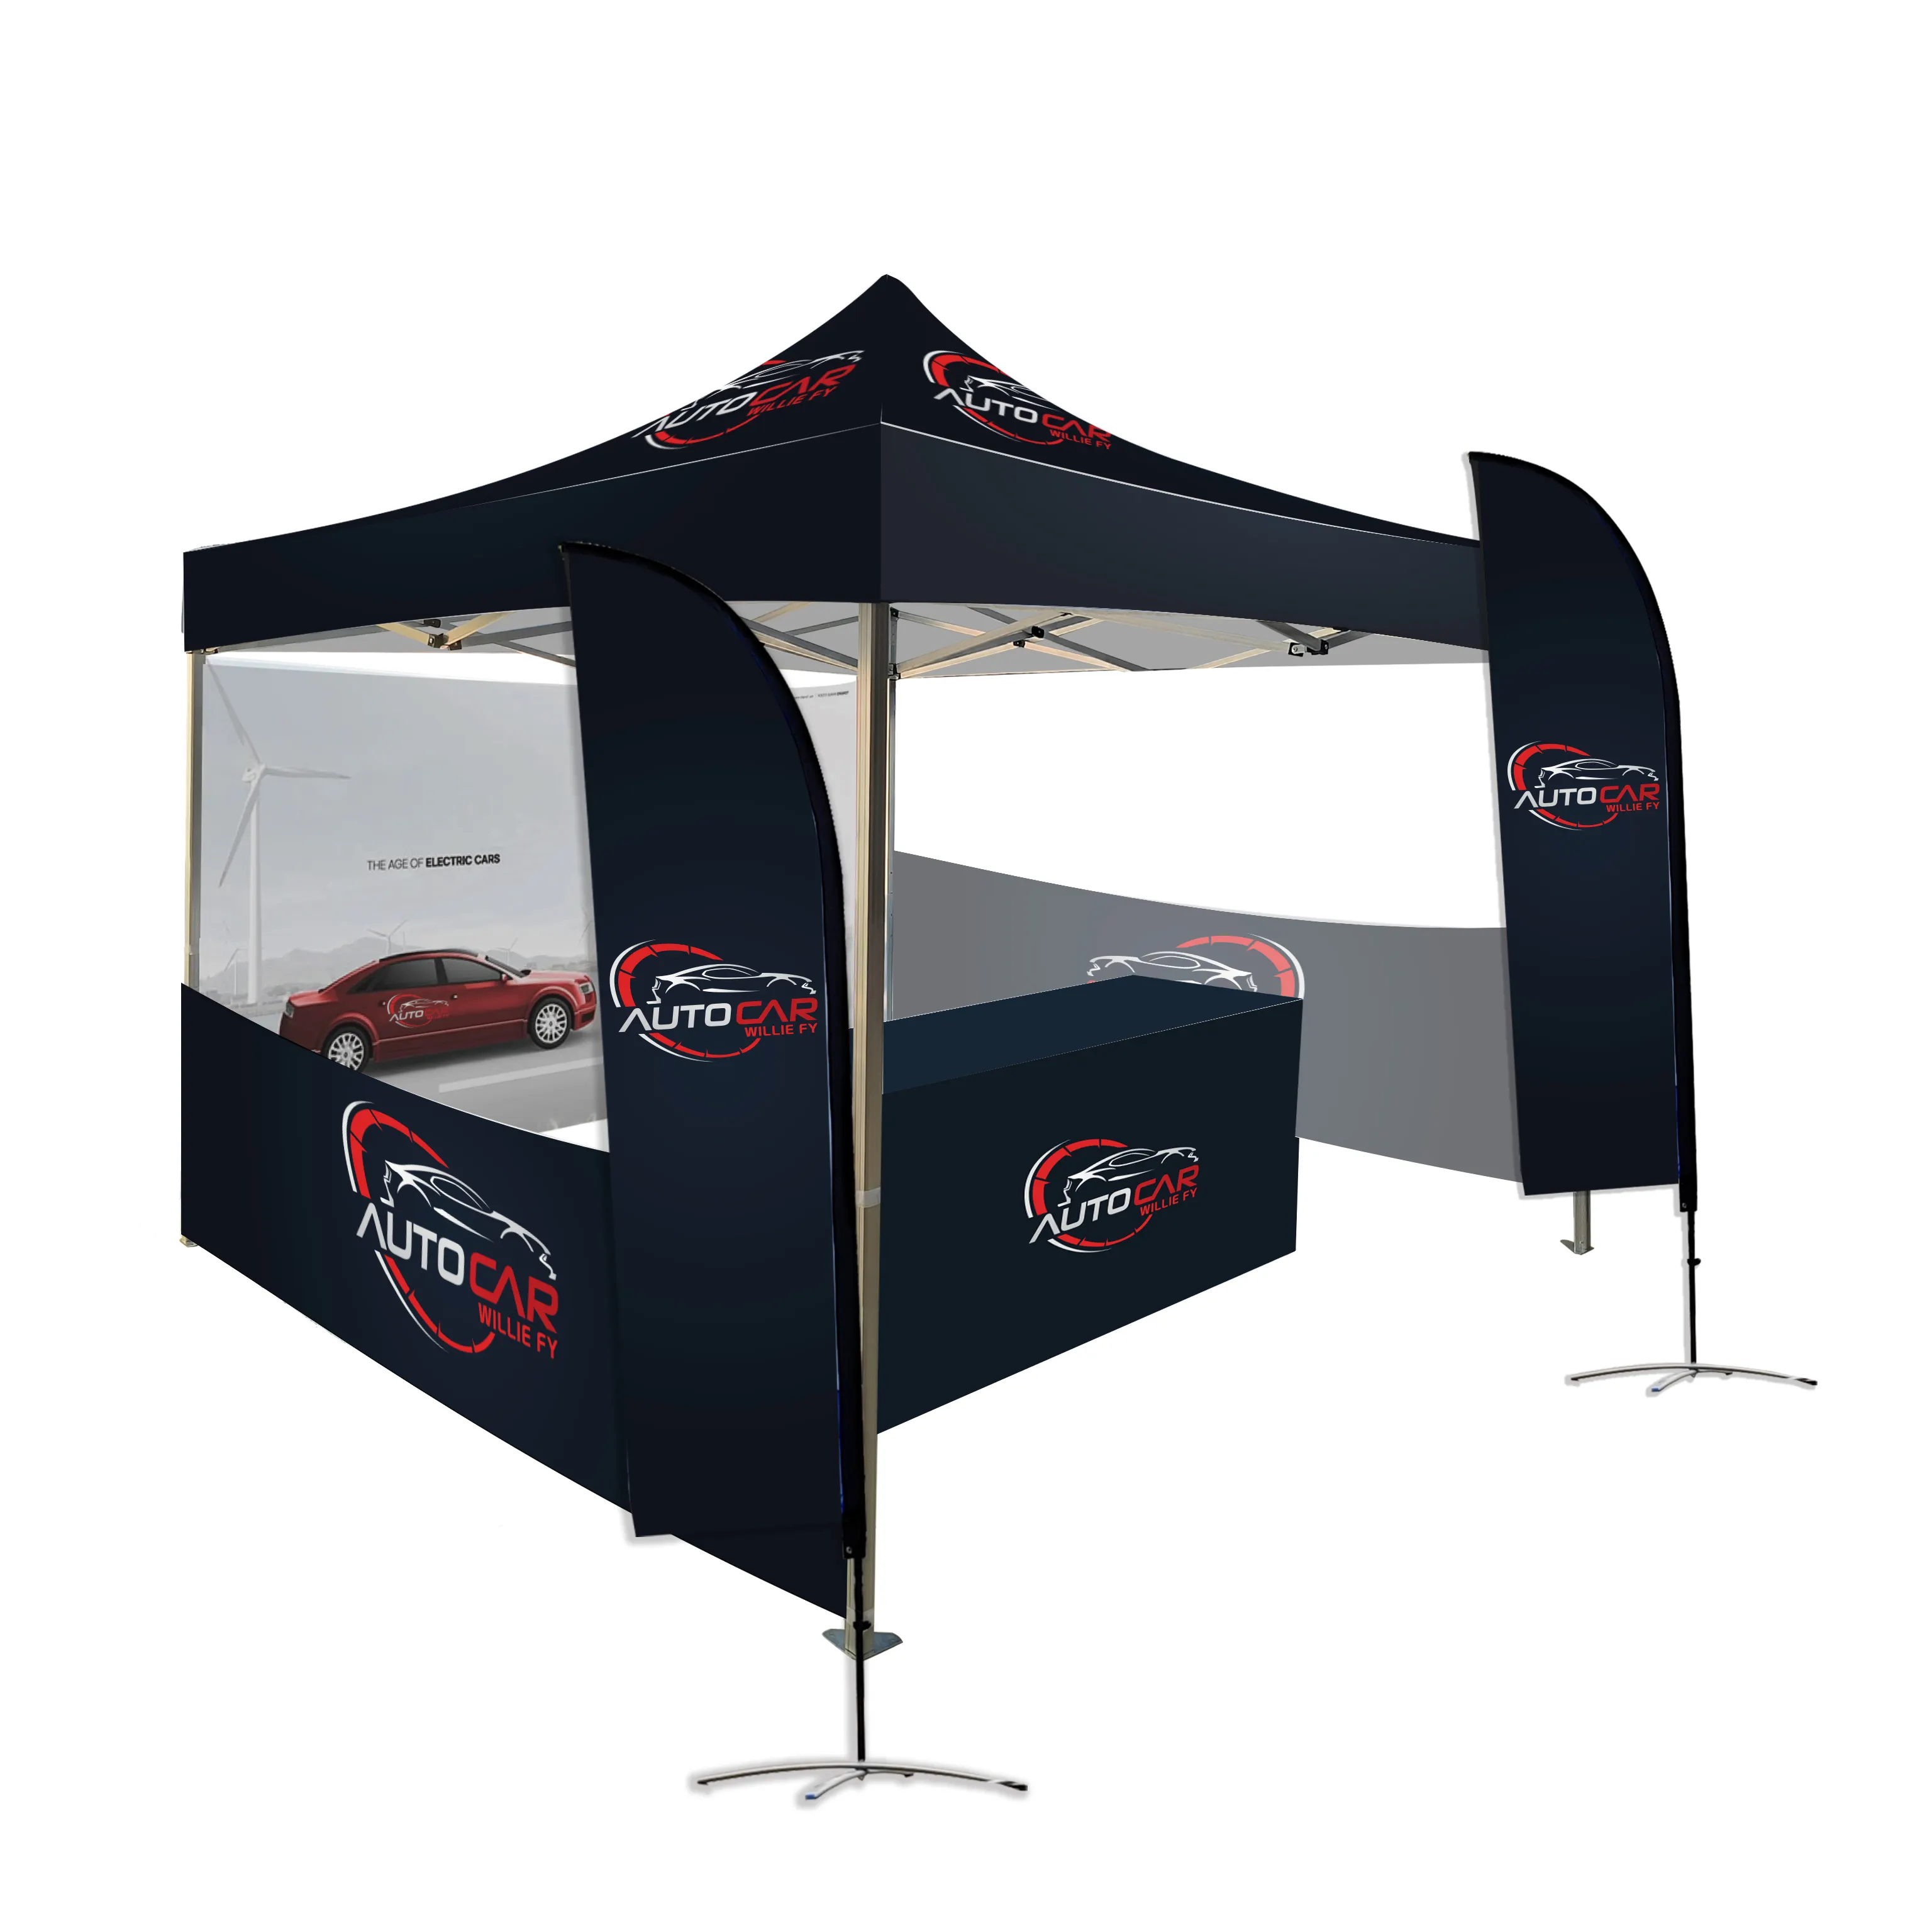 Folding aluminum gazebo tent 3x3 marquee event pop up tent outdoor custom canopy tent for trade show